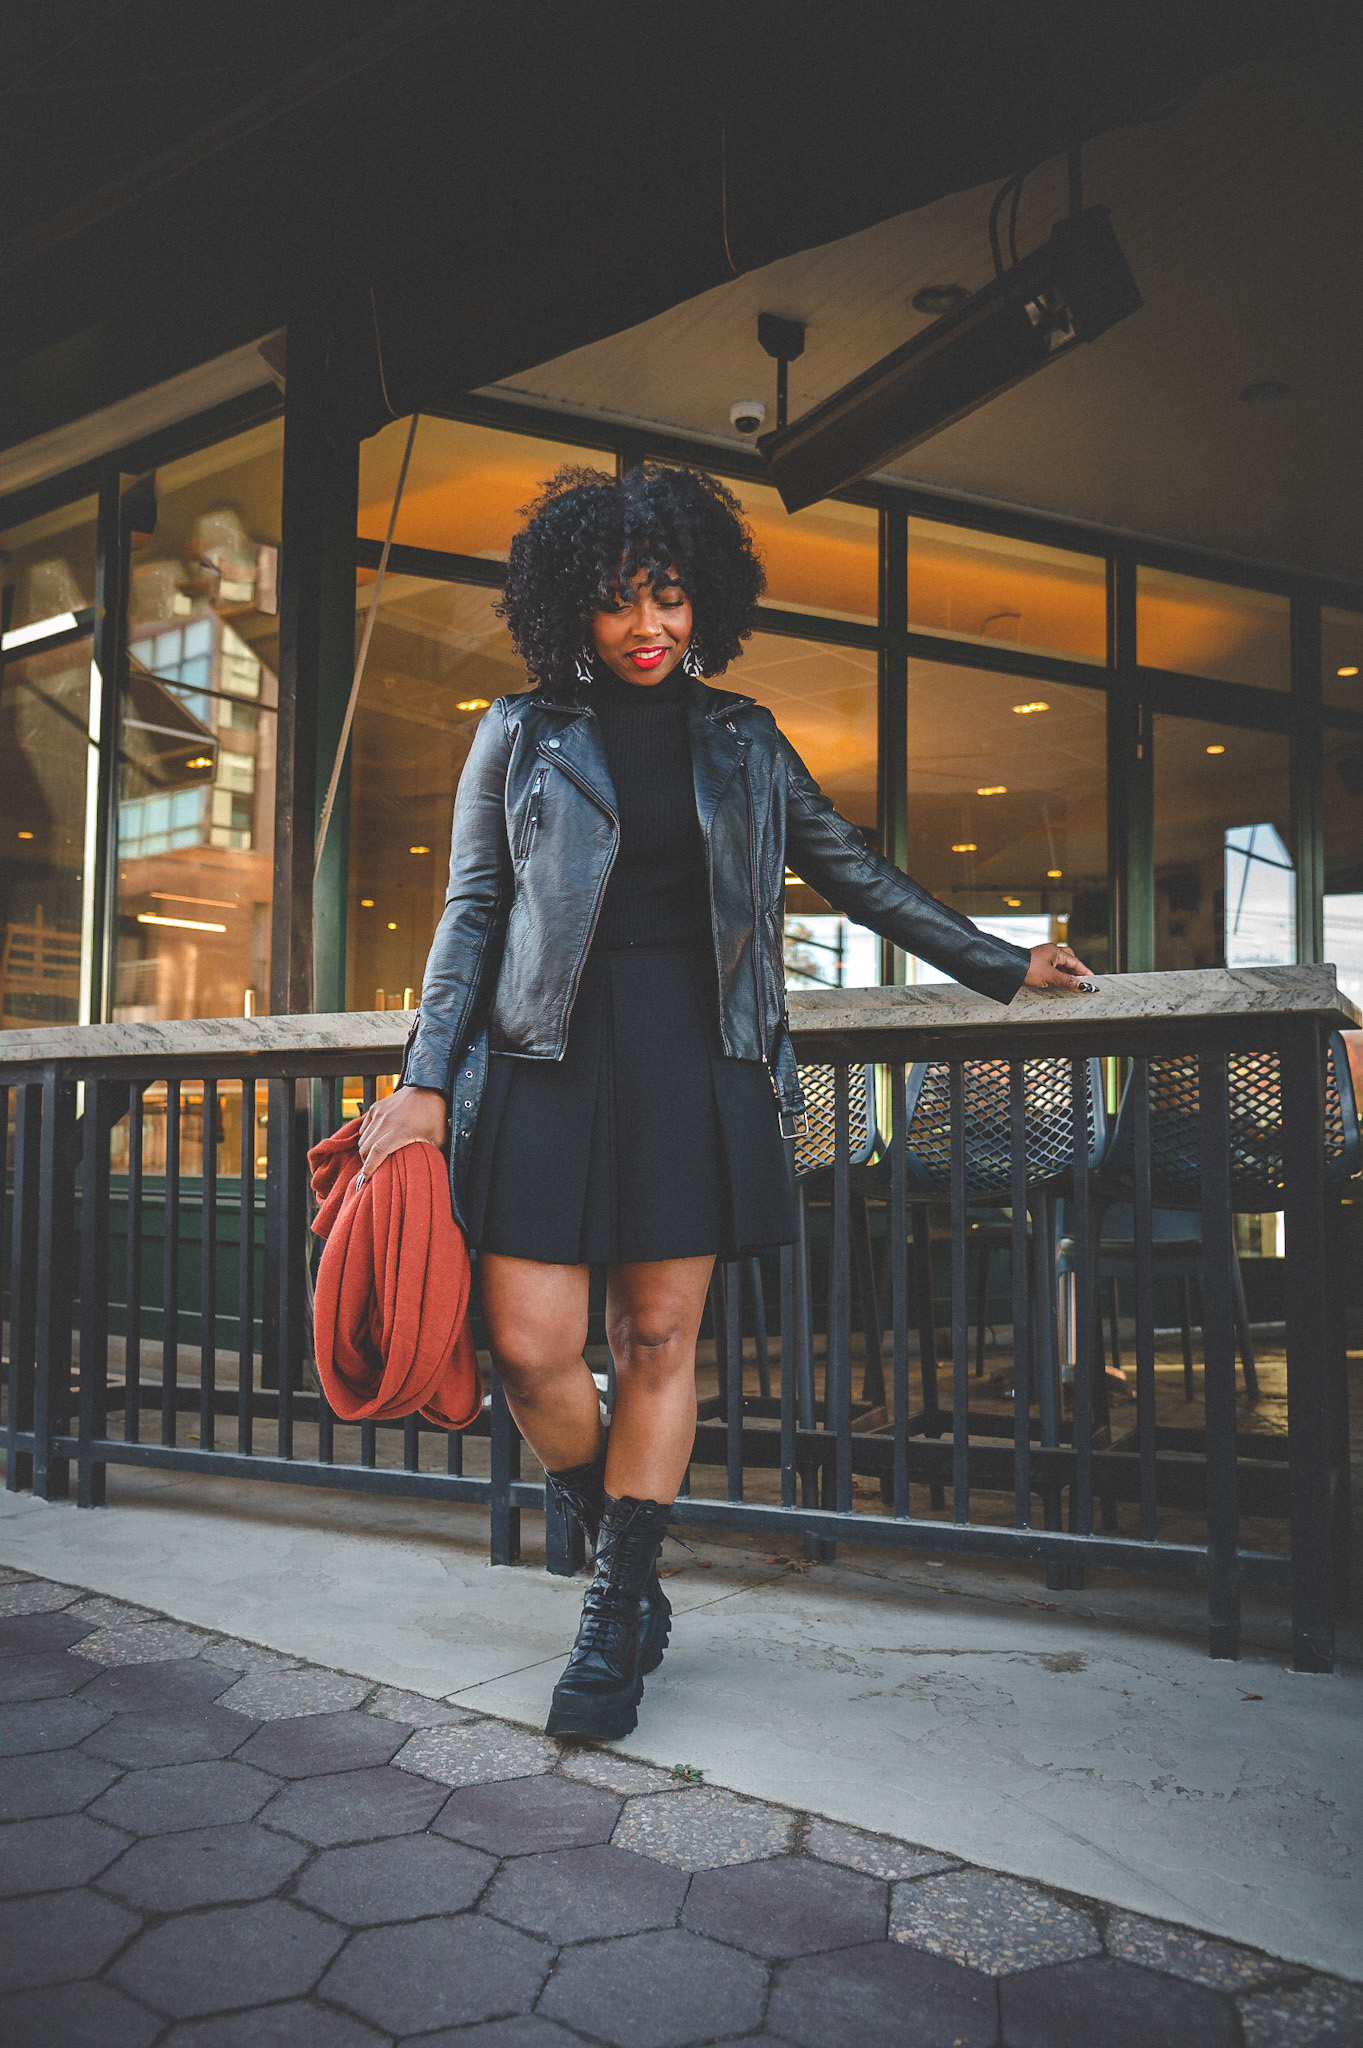 SWEENEE STYLE, MACY'S STYLE CREW, HOLIDAY STYLE 2022, WHAT TO WEAR TO THANKSGIVING, WHAT TO WEAR TO CHRISTMAS, HOW TO WEAR ALL BLACK, STYLING A LEATHER JACKET, INDIANAPOLIS FASHION BLOG